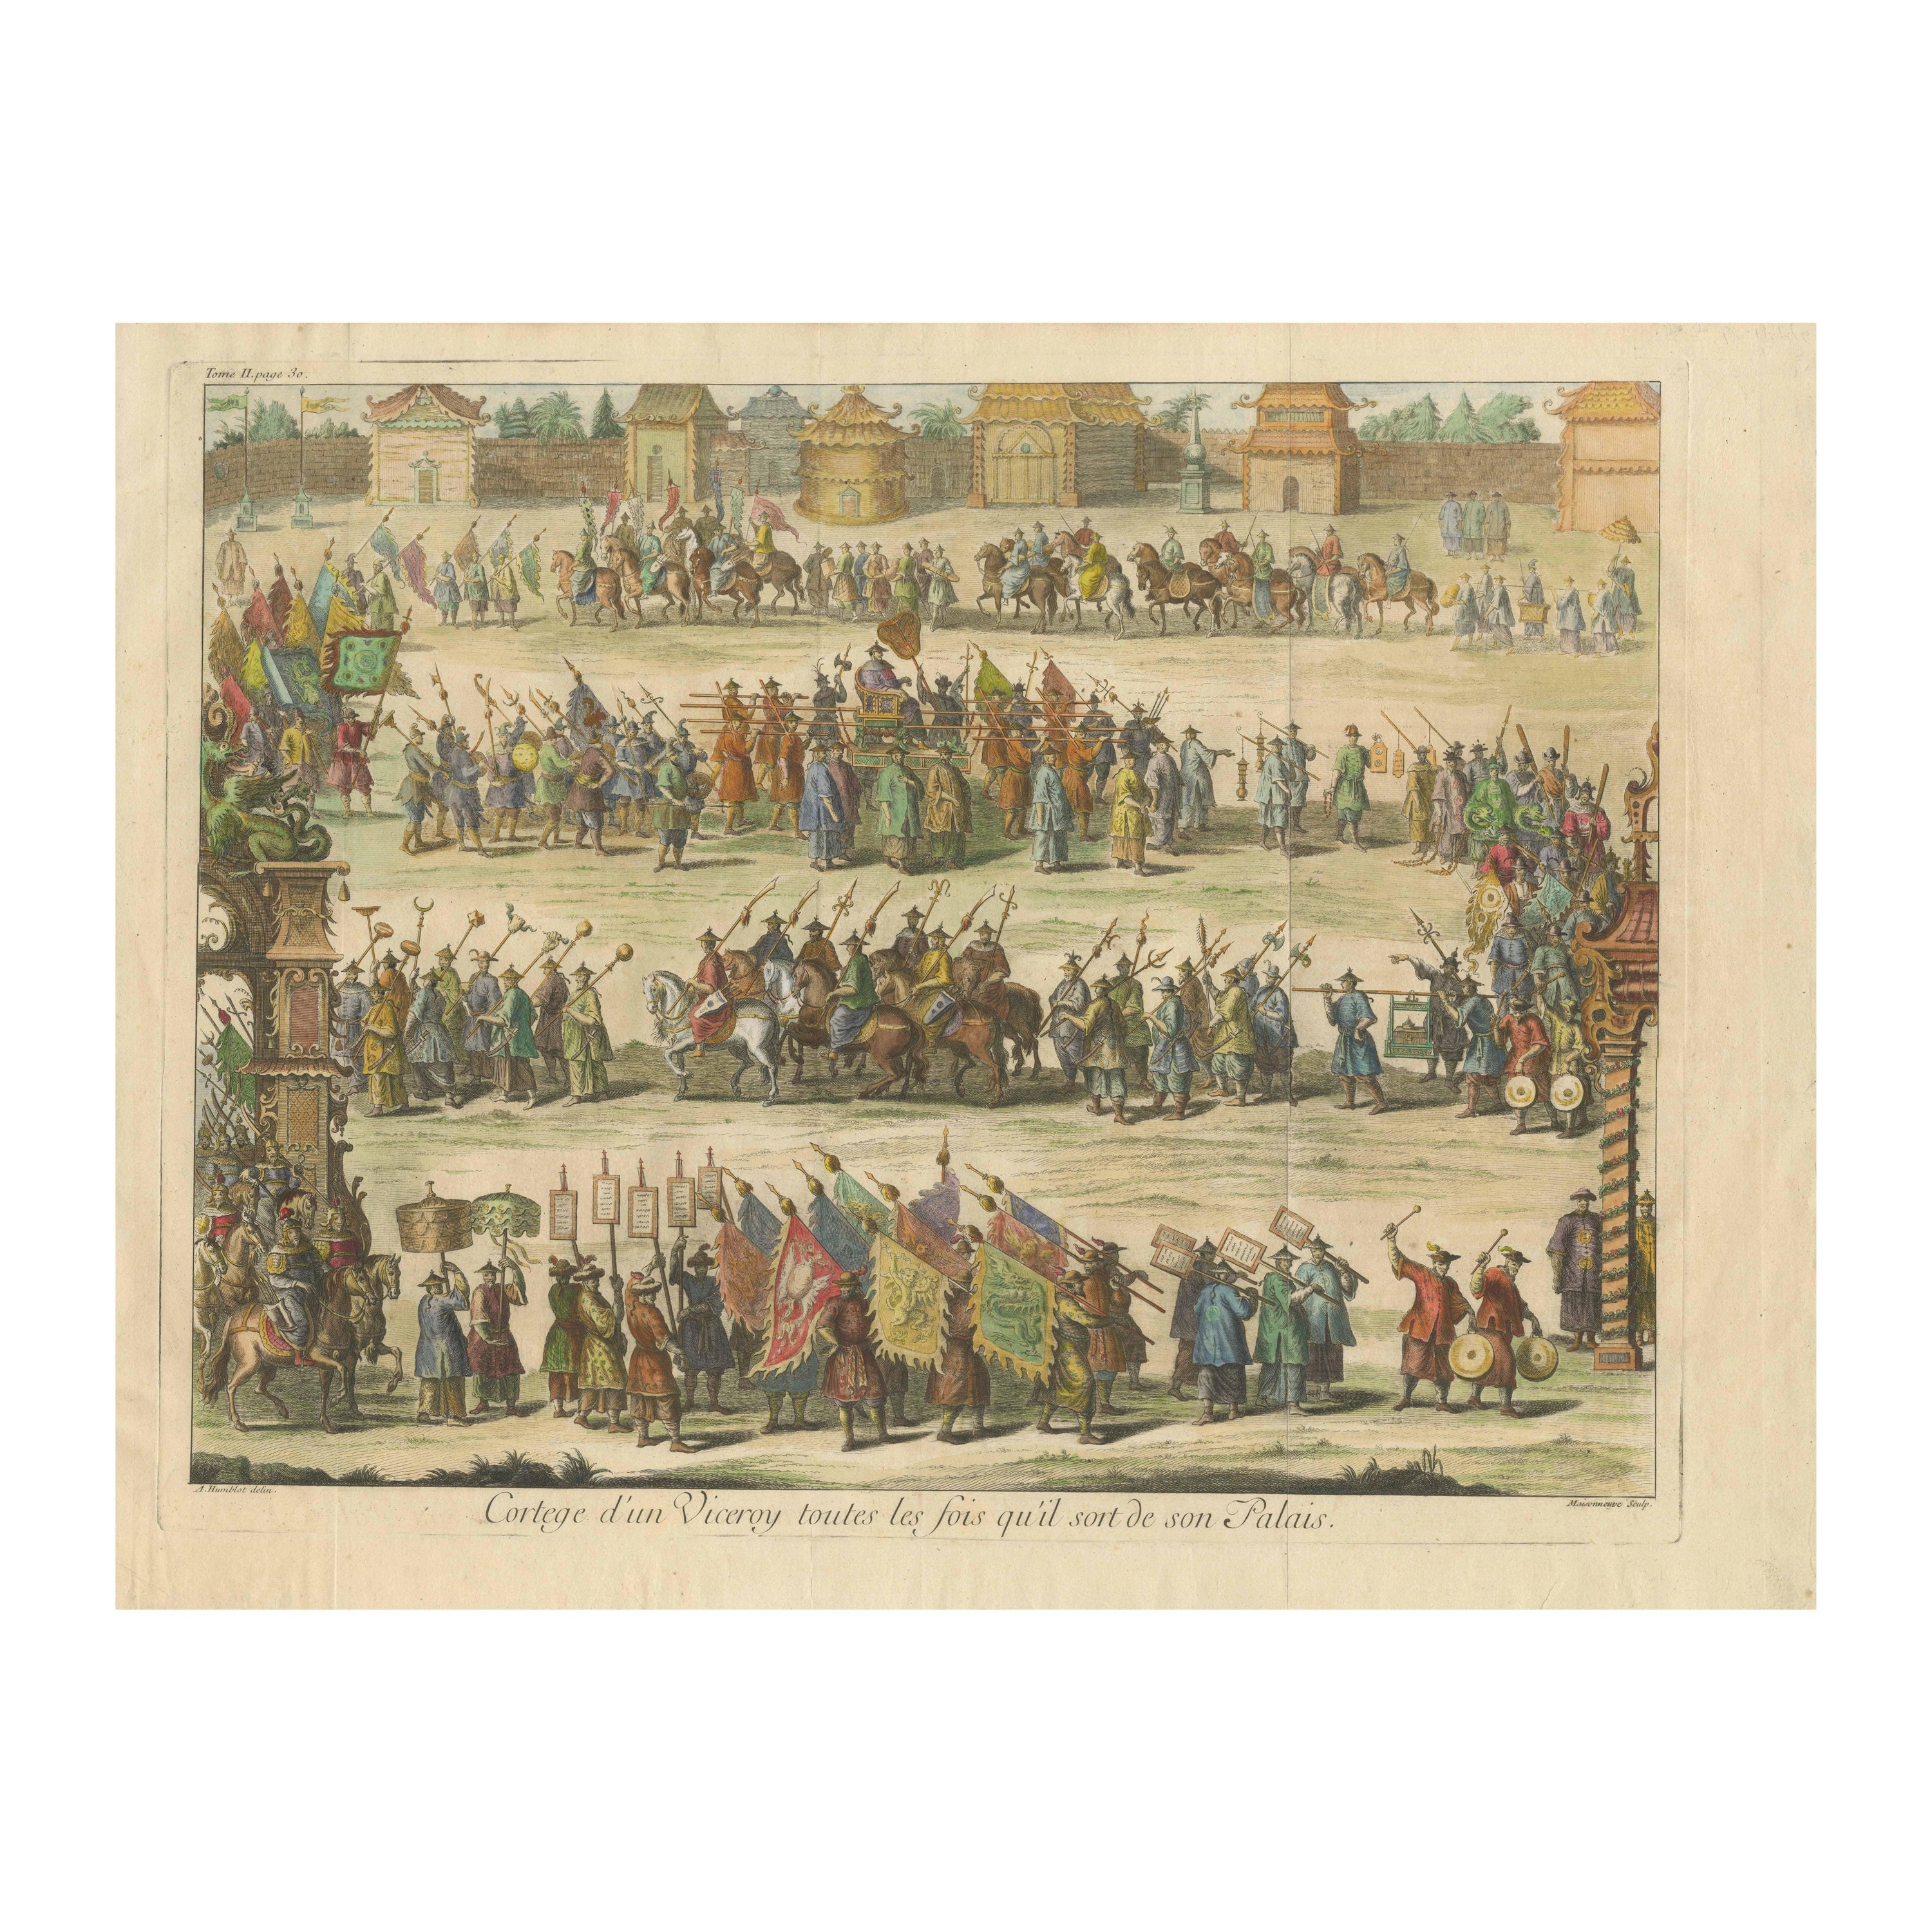 Old Original Copper Engraving Depicting a Viceroy with Entourage in China, 1735 For Sale